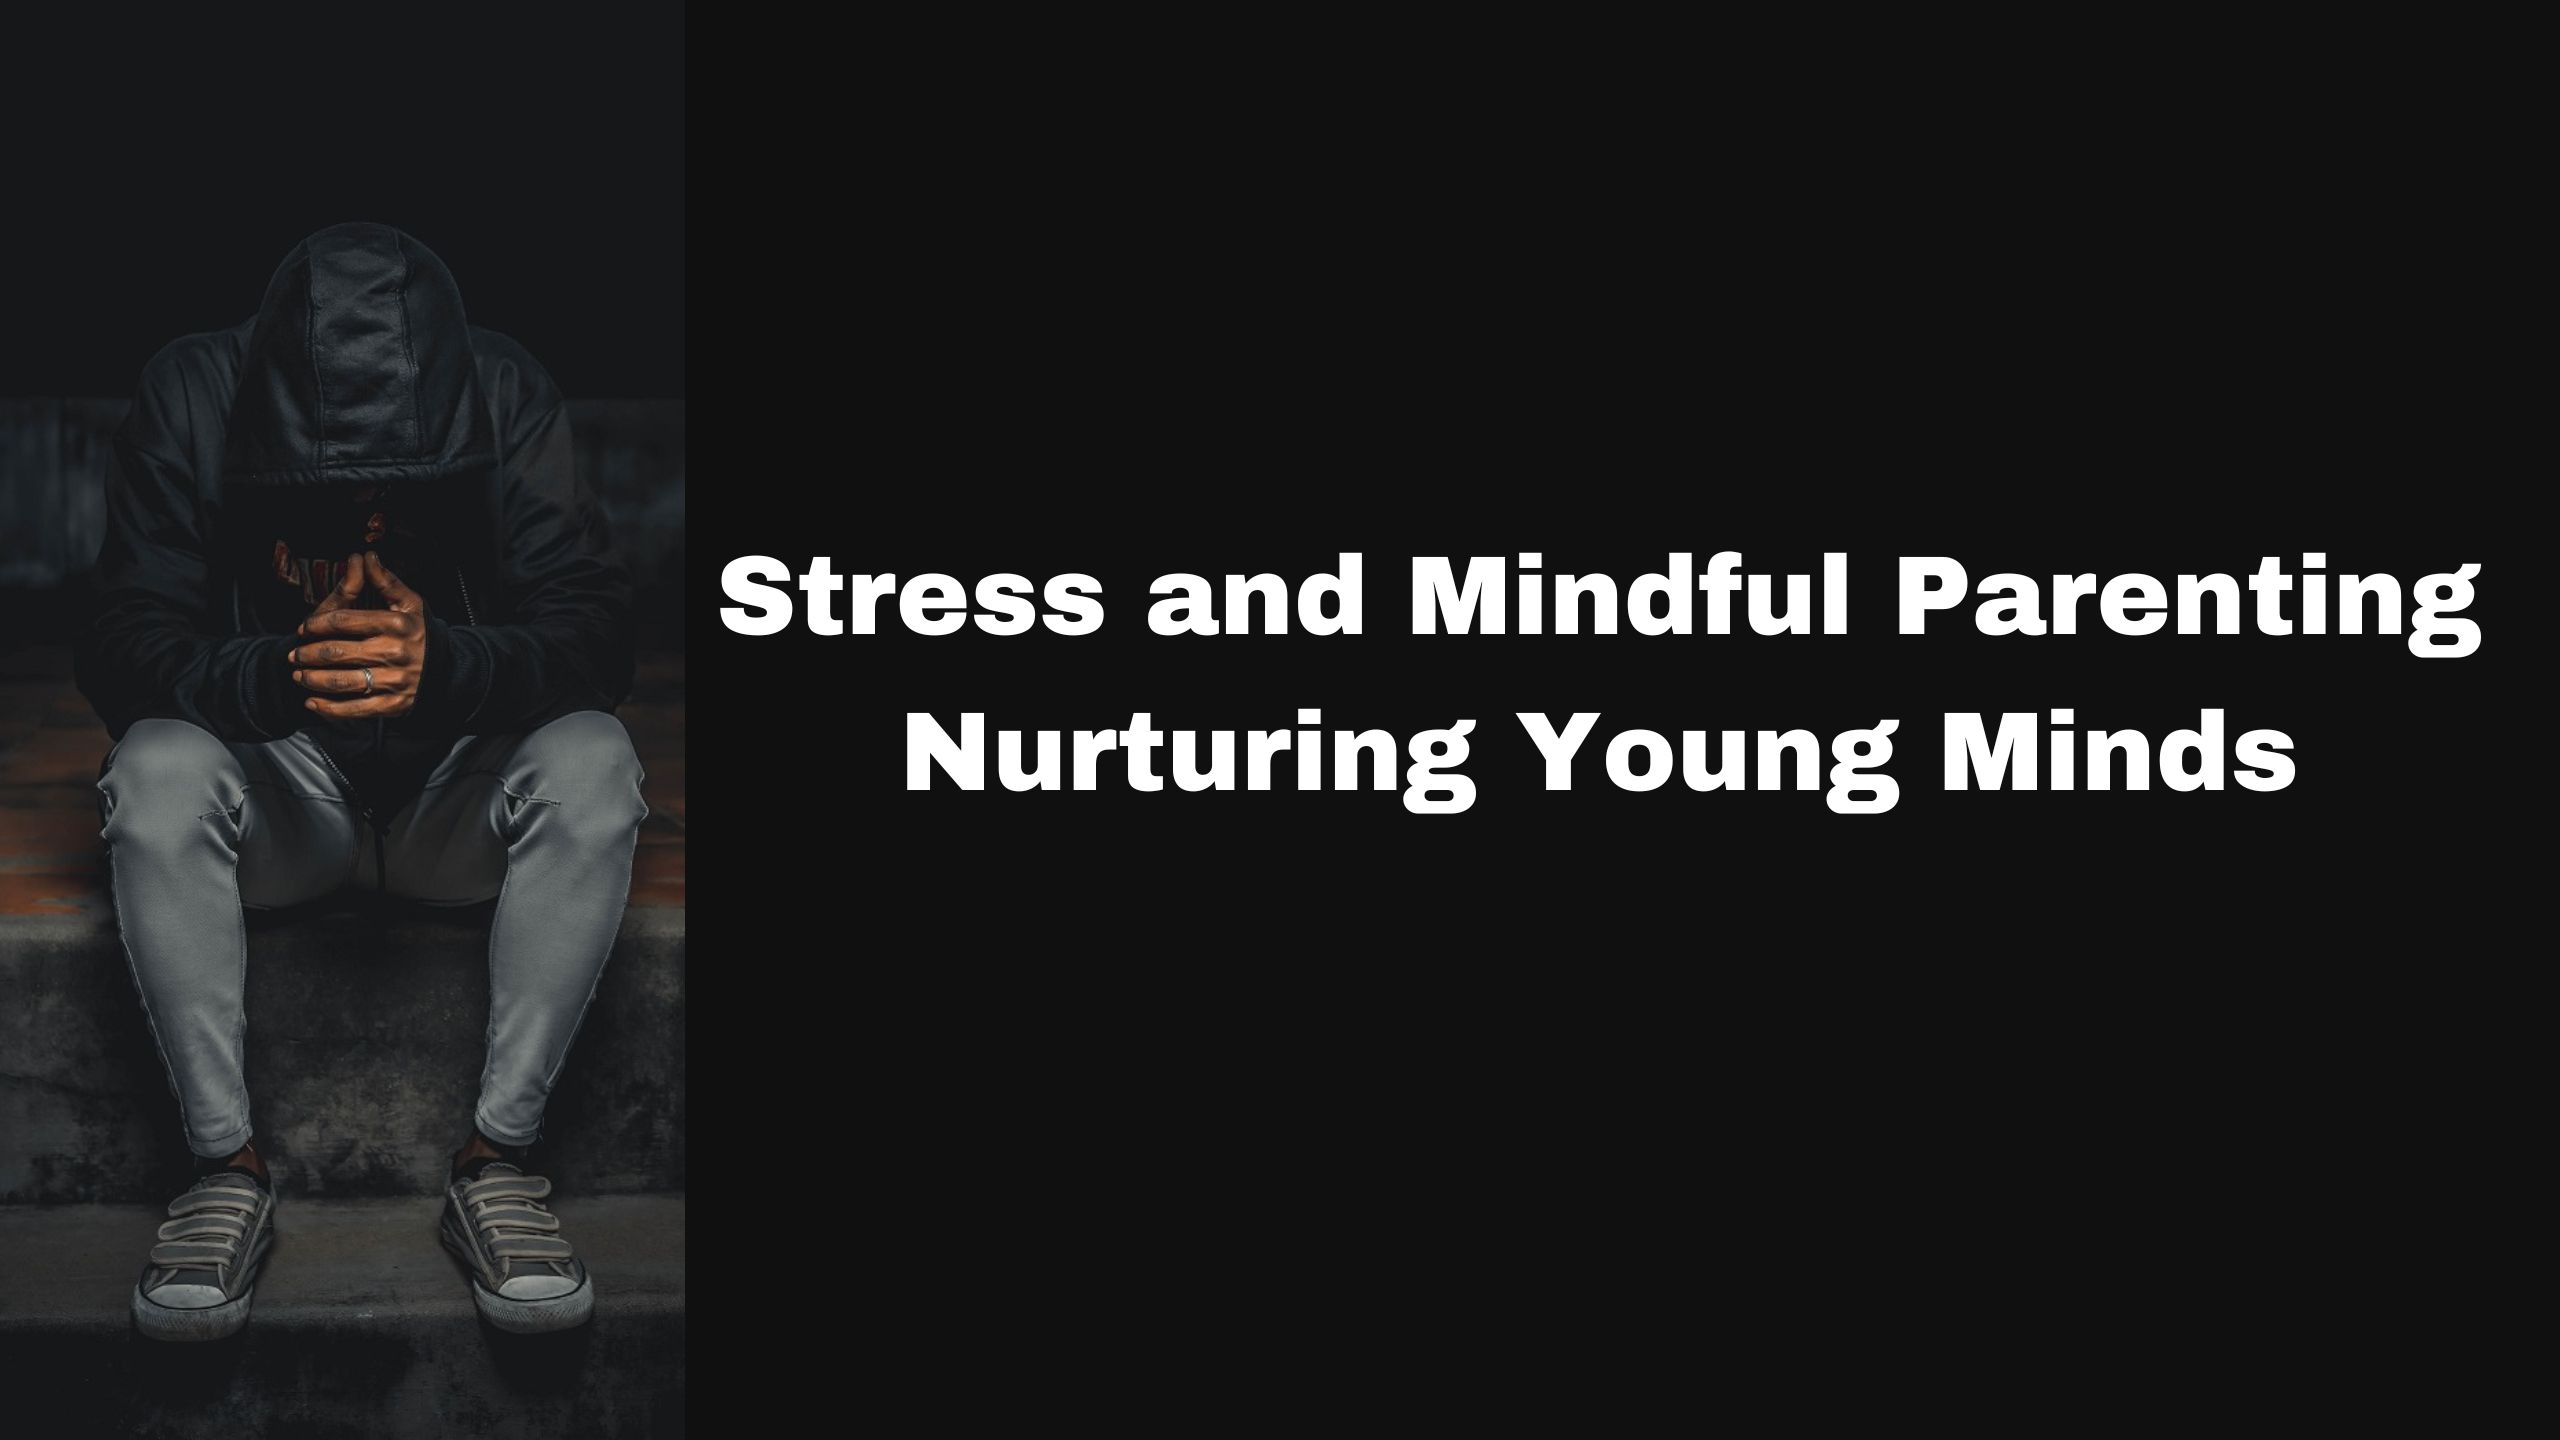 Stress and Mindful Parenting